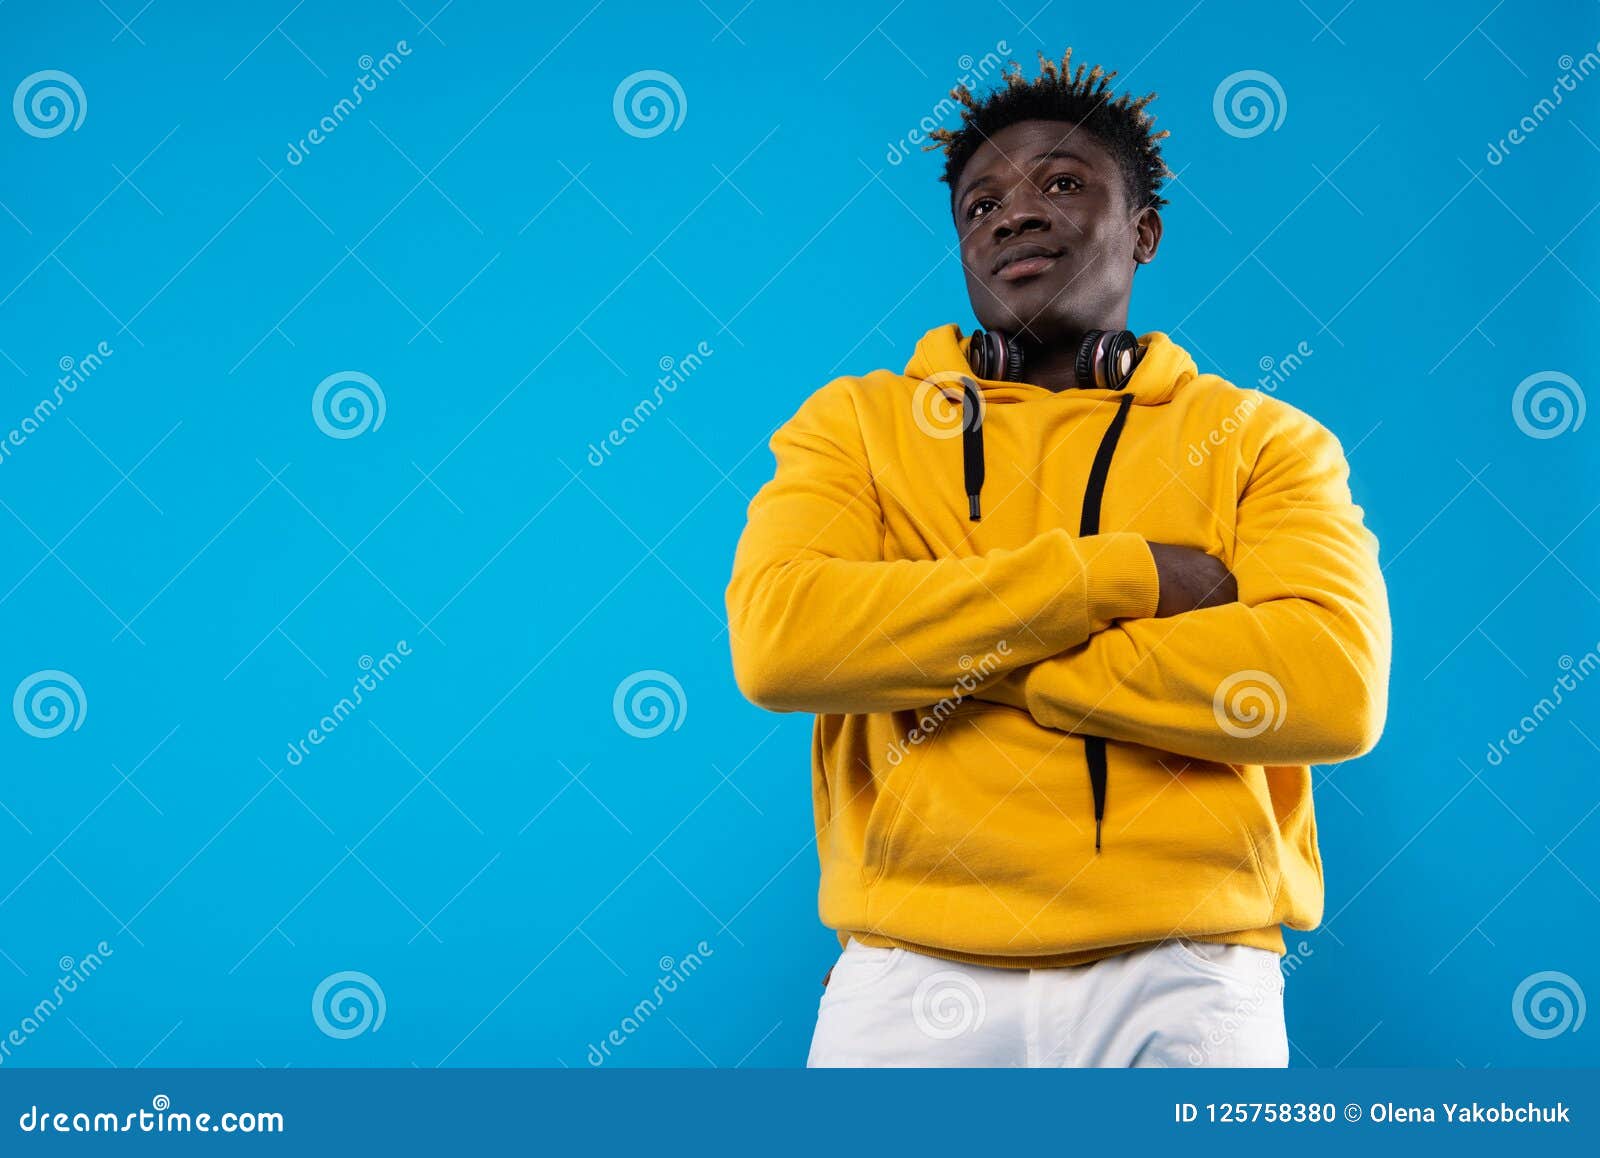 Handsome Guy with Crossed Arms is Posing Stock Photo - Image of ...